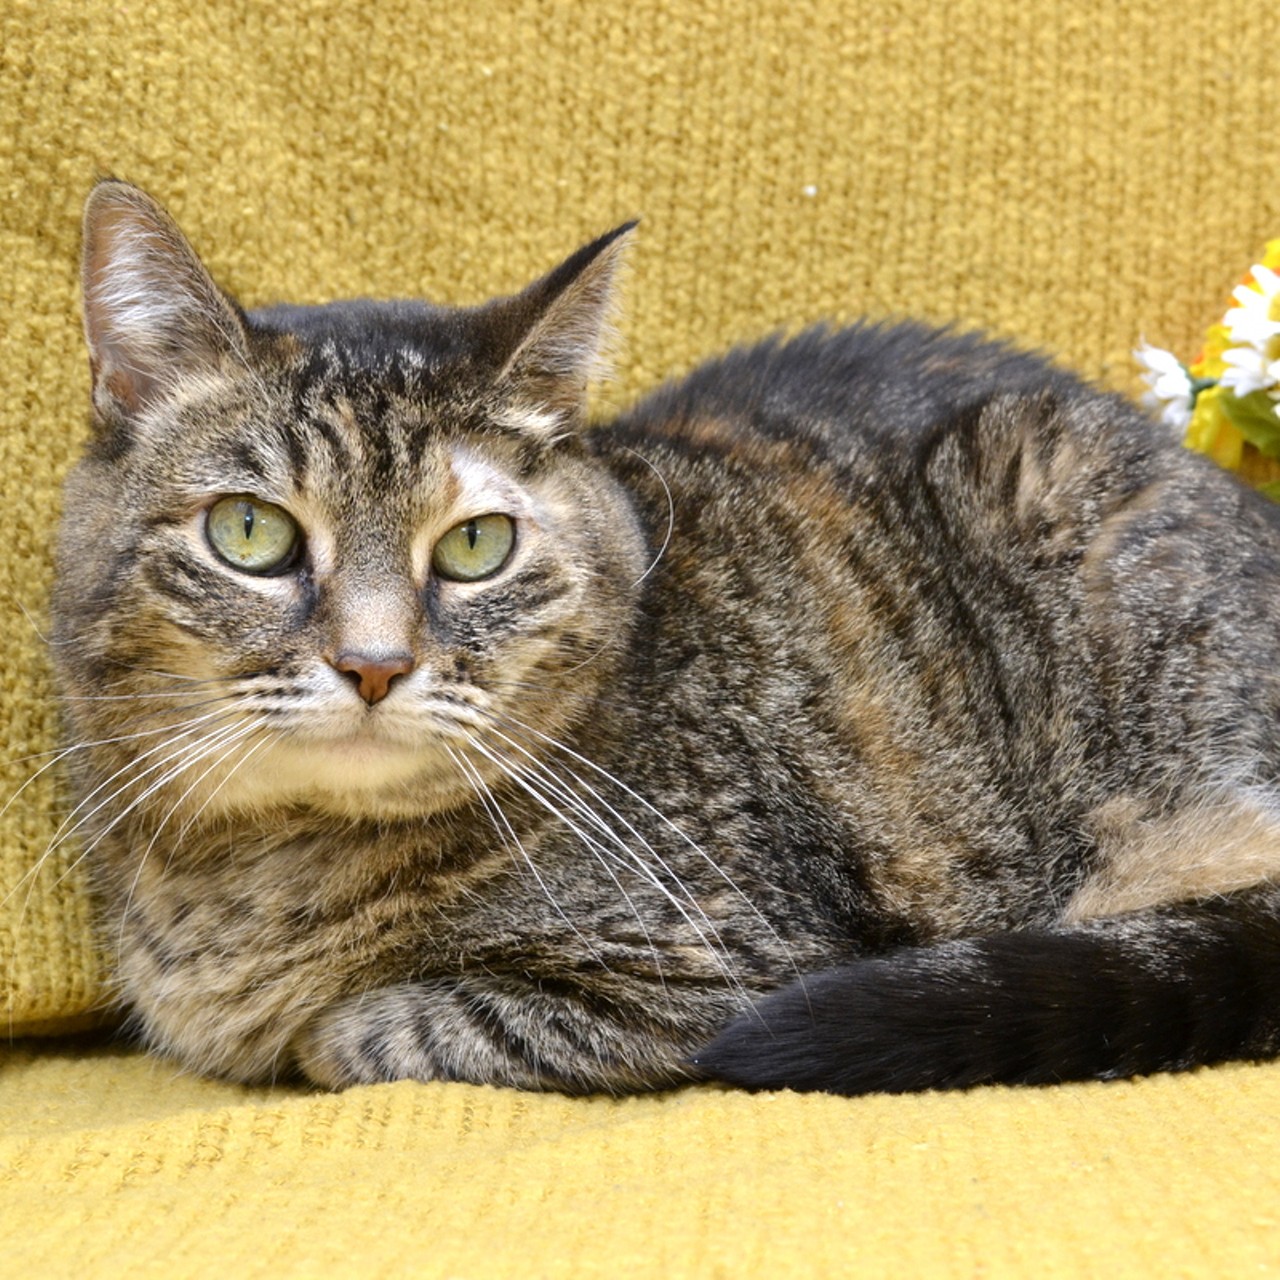 NAME:  Princess 
GENDER: Female
BREED: Domestic Short Hair
AGE: 10 years, 1 month
WEIGHT: 10 pounds
SPECIAL CONSIDERATIONS: None
REASON I CAME TO MHS: Owner surrender
LOCATION: Berman Center for Animal Care in Westland
ID NUMBER: 867102